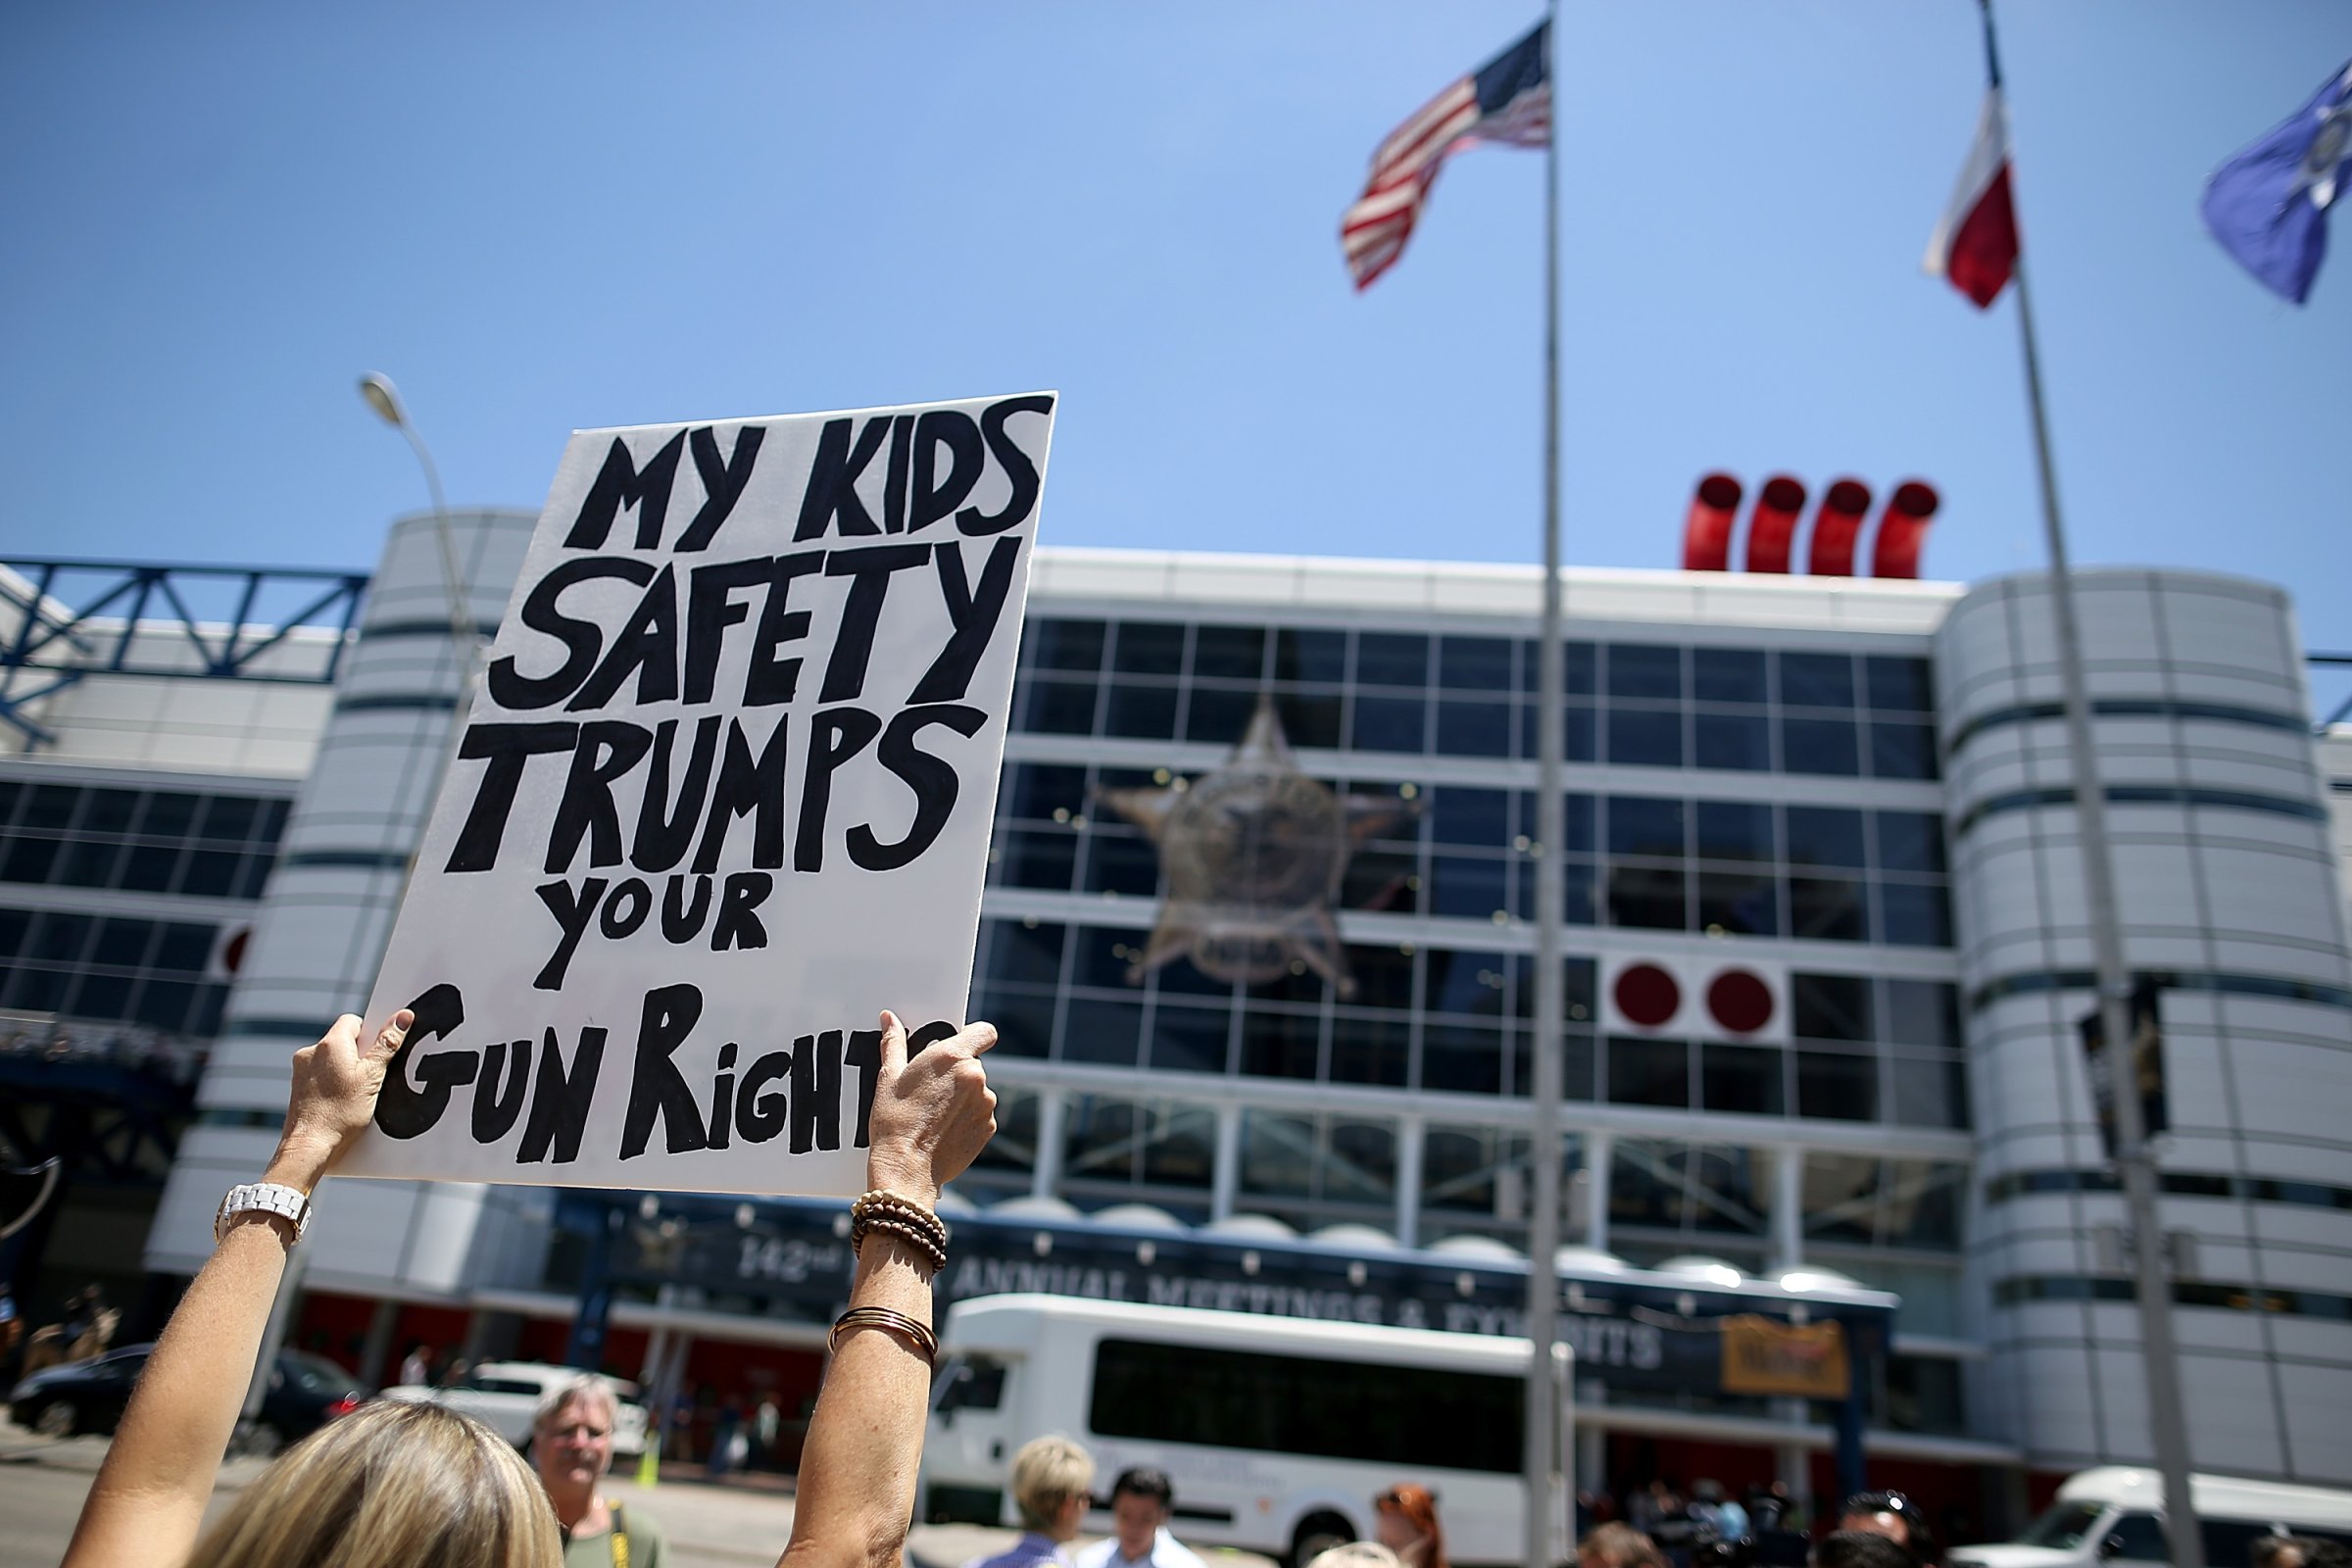 A protestor holds a sign during a demonstration in favor of gun regulation in Houston on May 4, 2013.